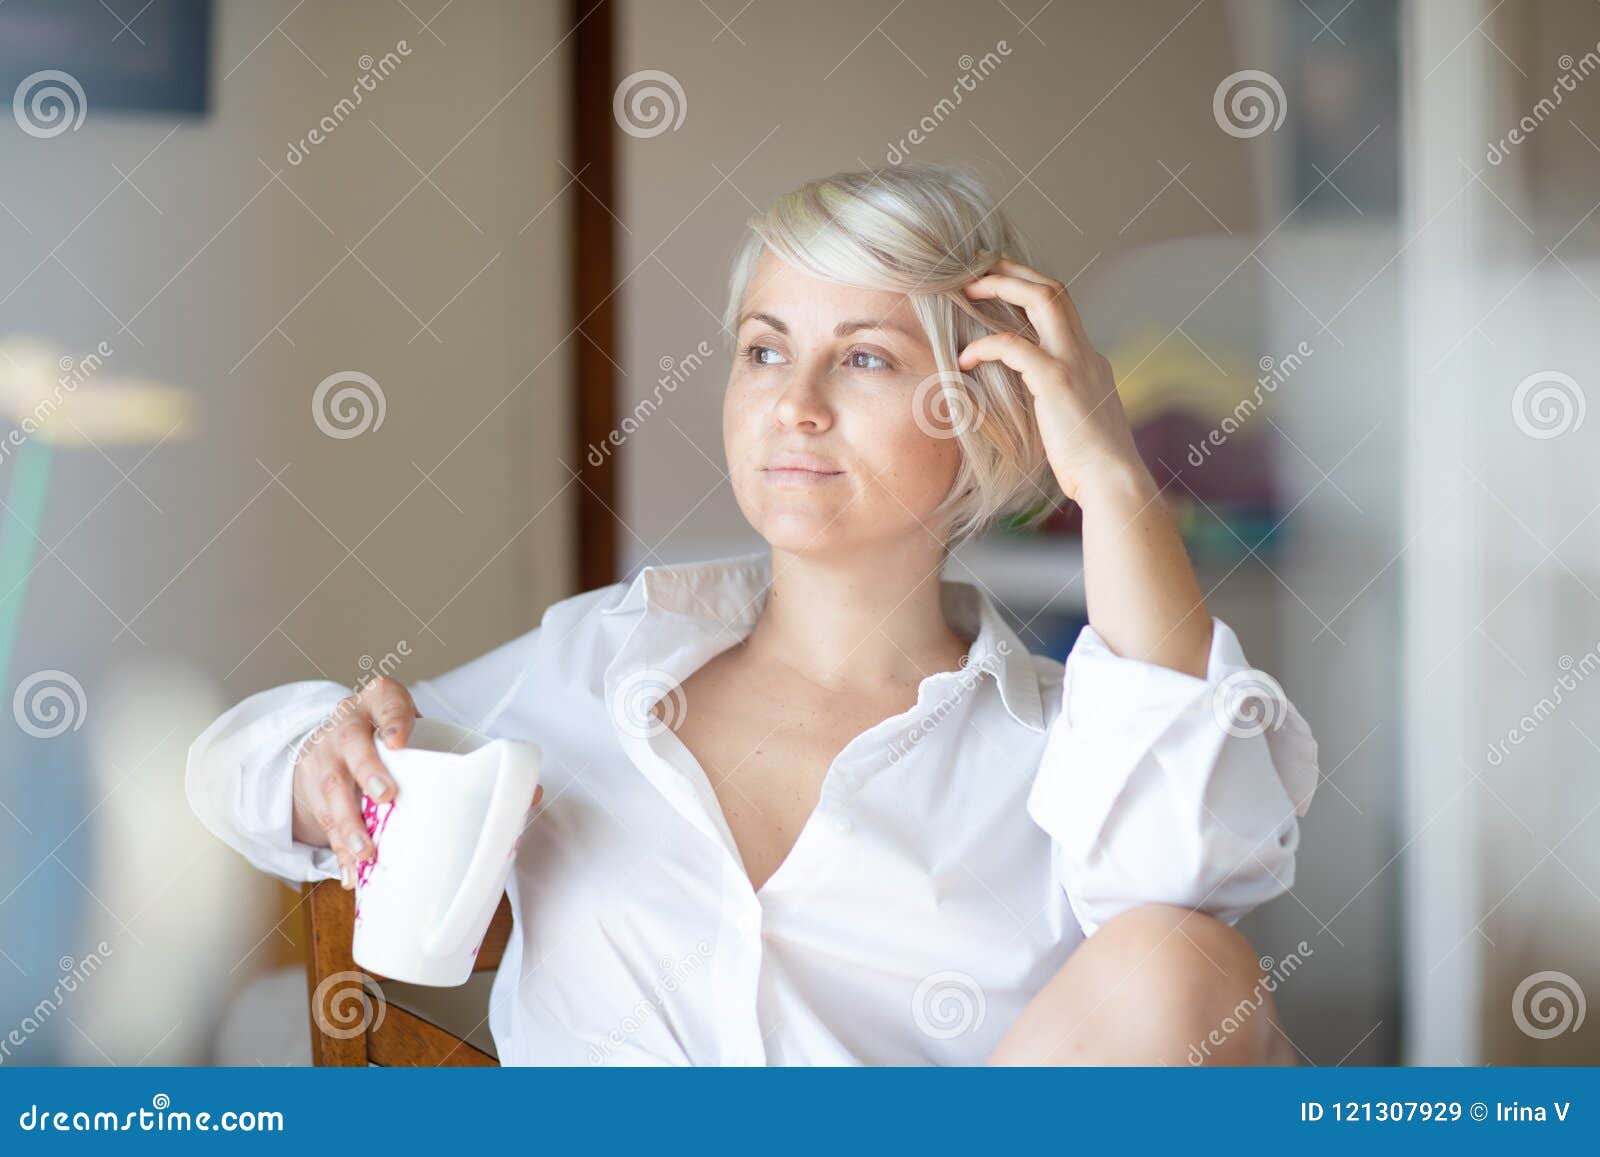 Serious Young Blonde Woman Sitting In Her Room Looking Pensively In The ... Open Window At Morning